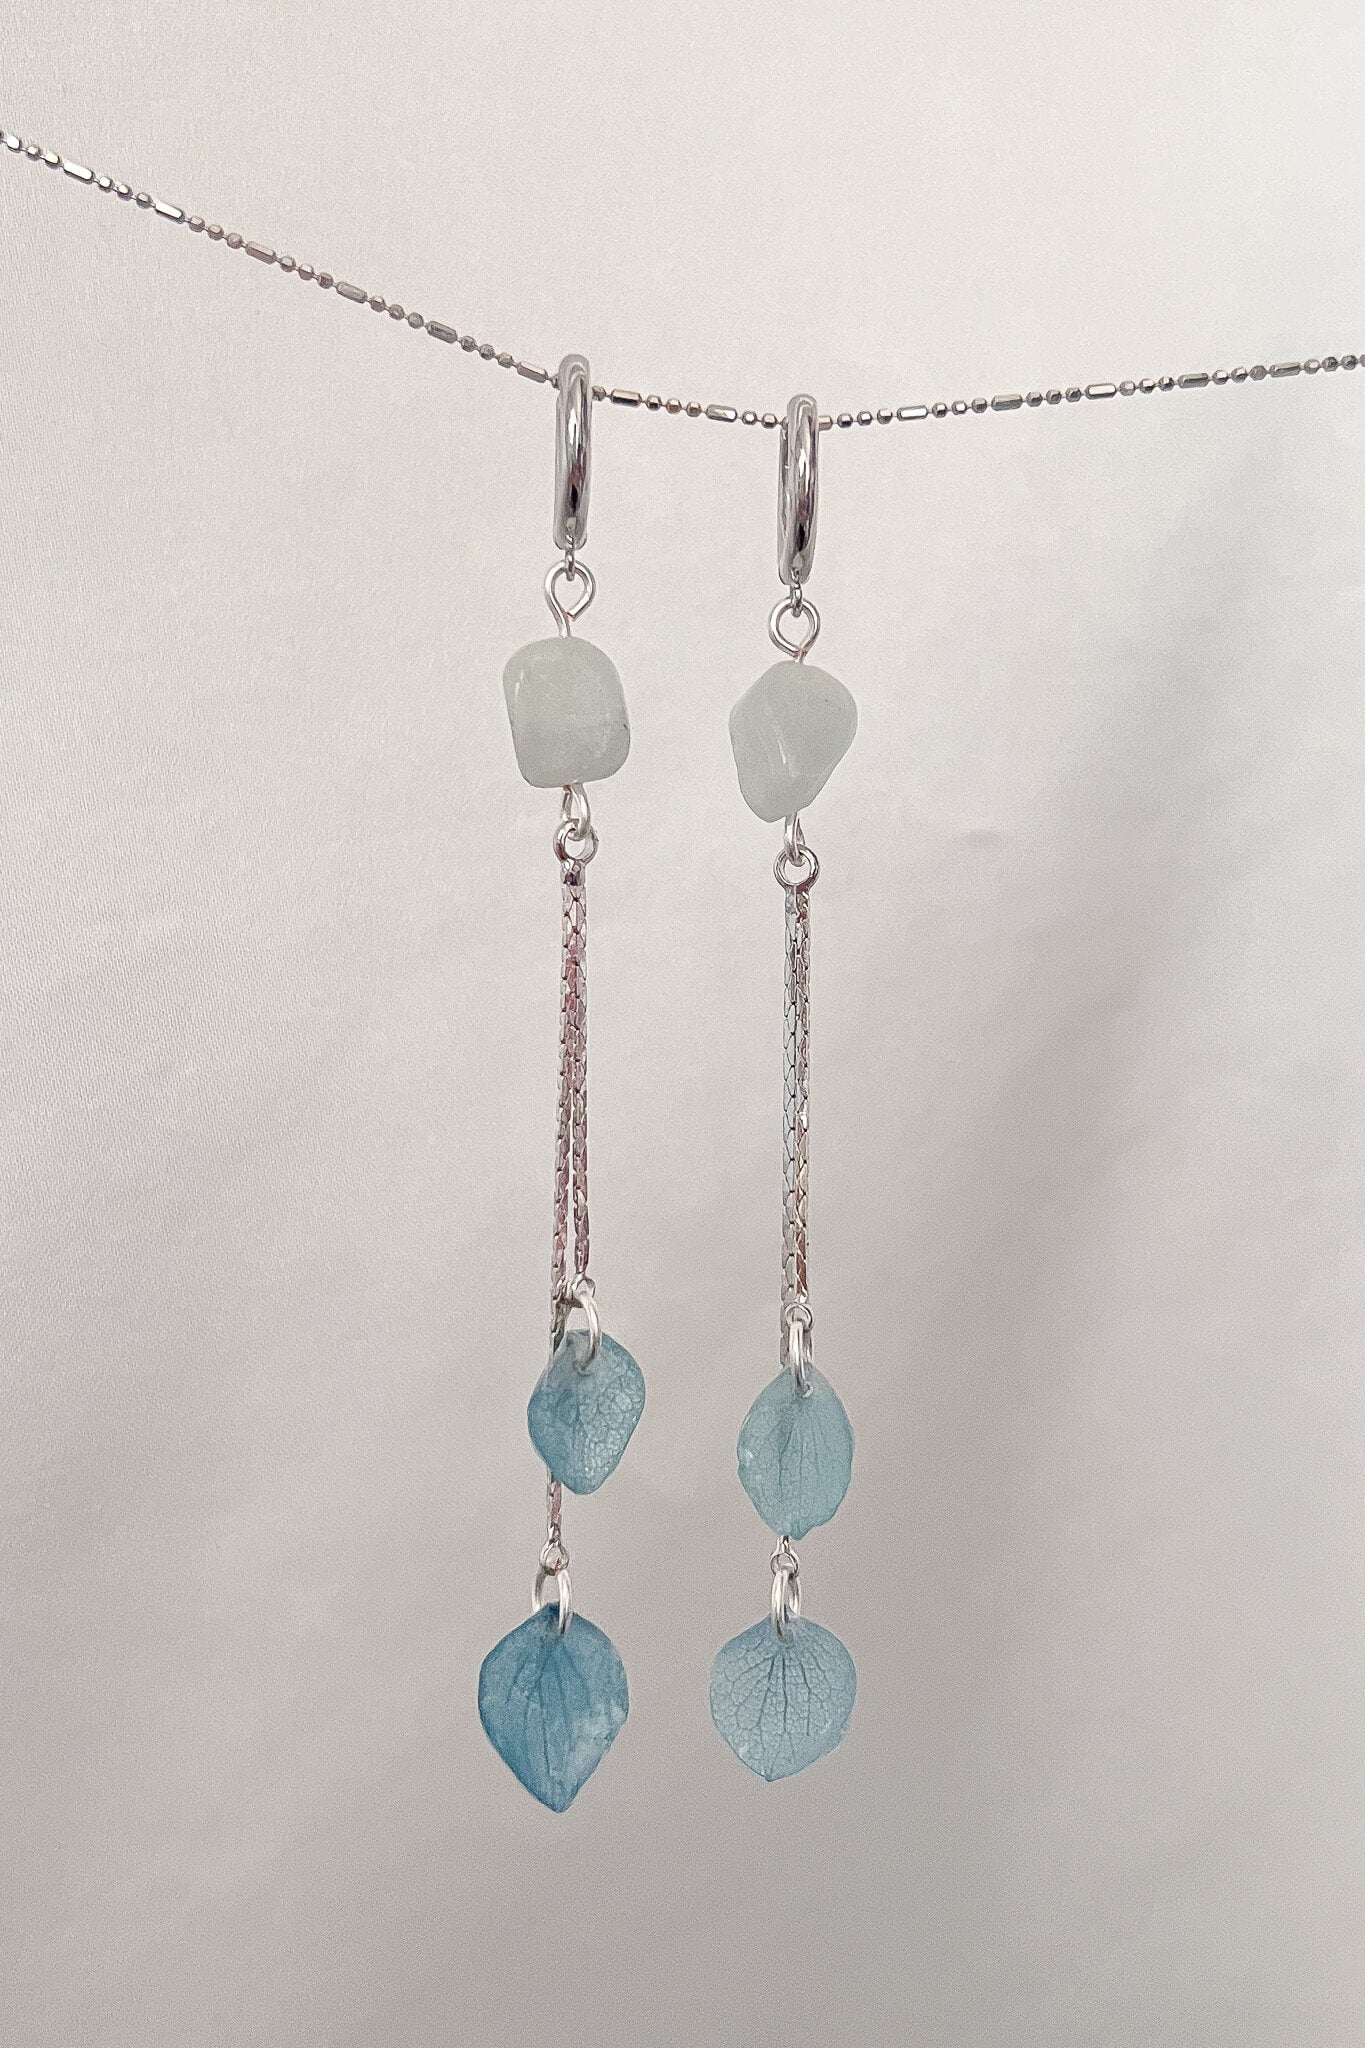 These earrings feature a crystal piece and delicately dangling preserved hydrangea petals, making them the perfect combination of simple elegance. These earrings will add a unique touch to any look!